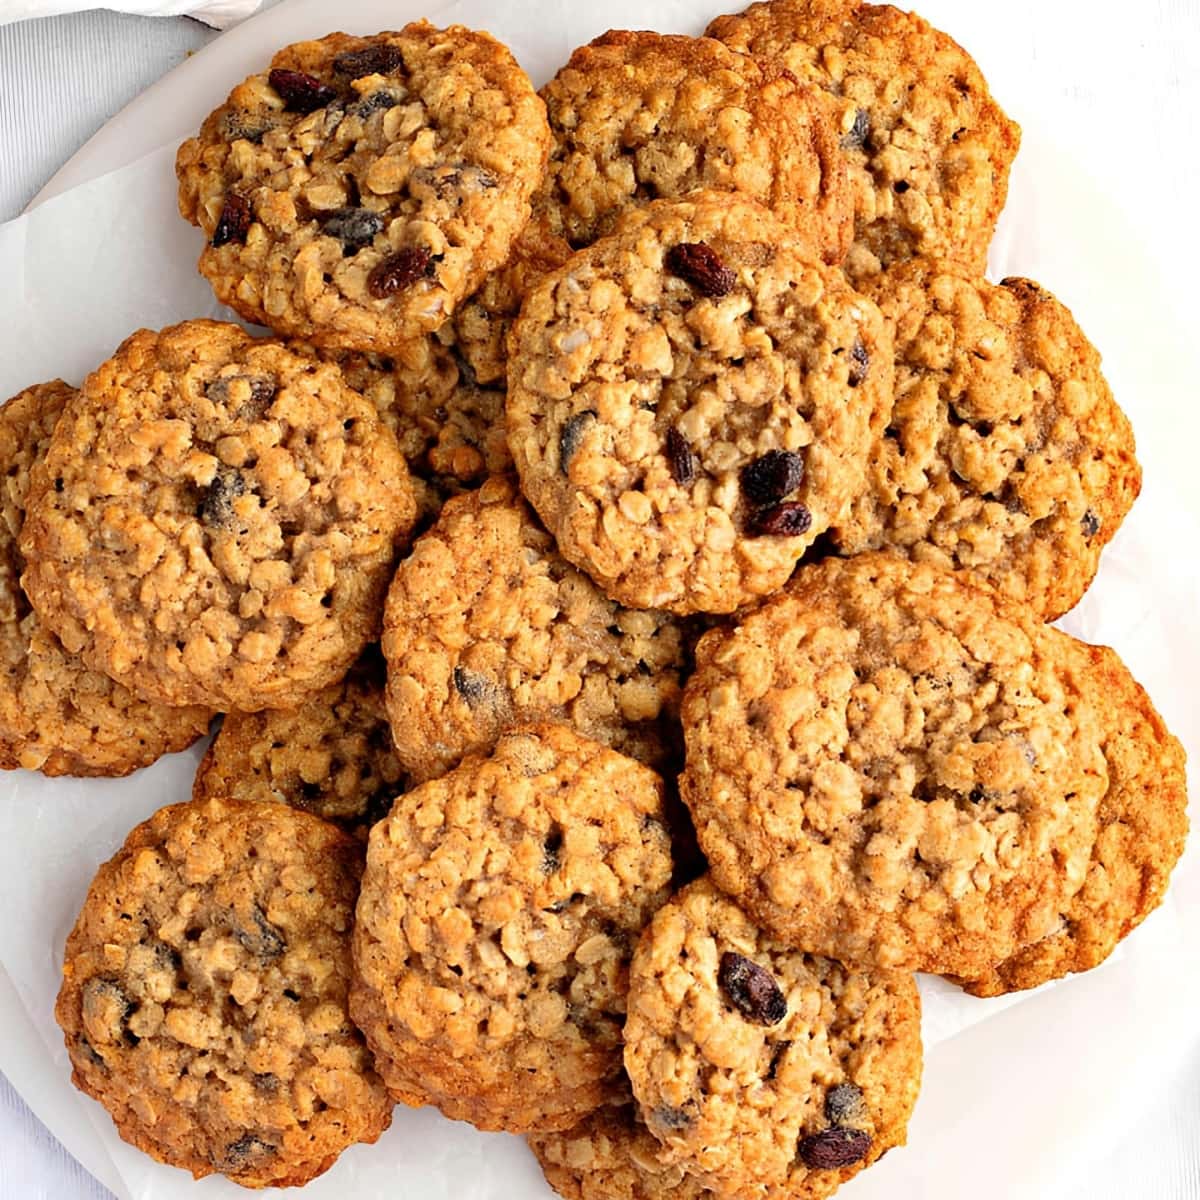 Bunch of Oatmeal Raisin Cookies on a Plate with Parchment Paper